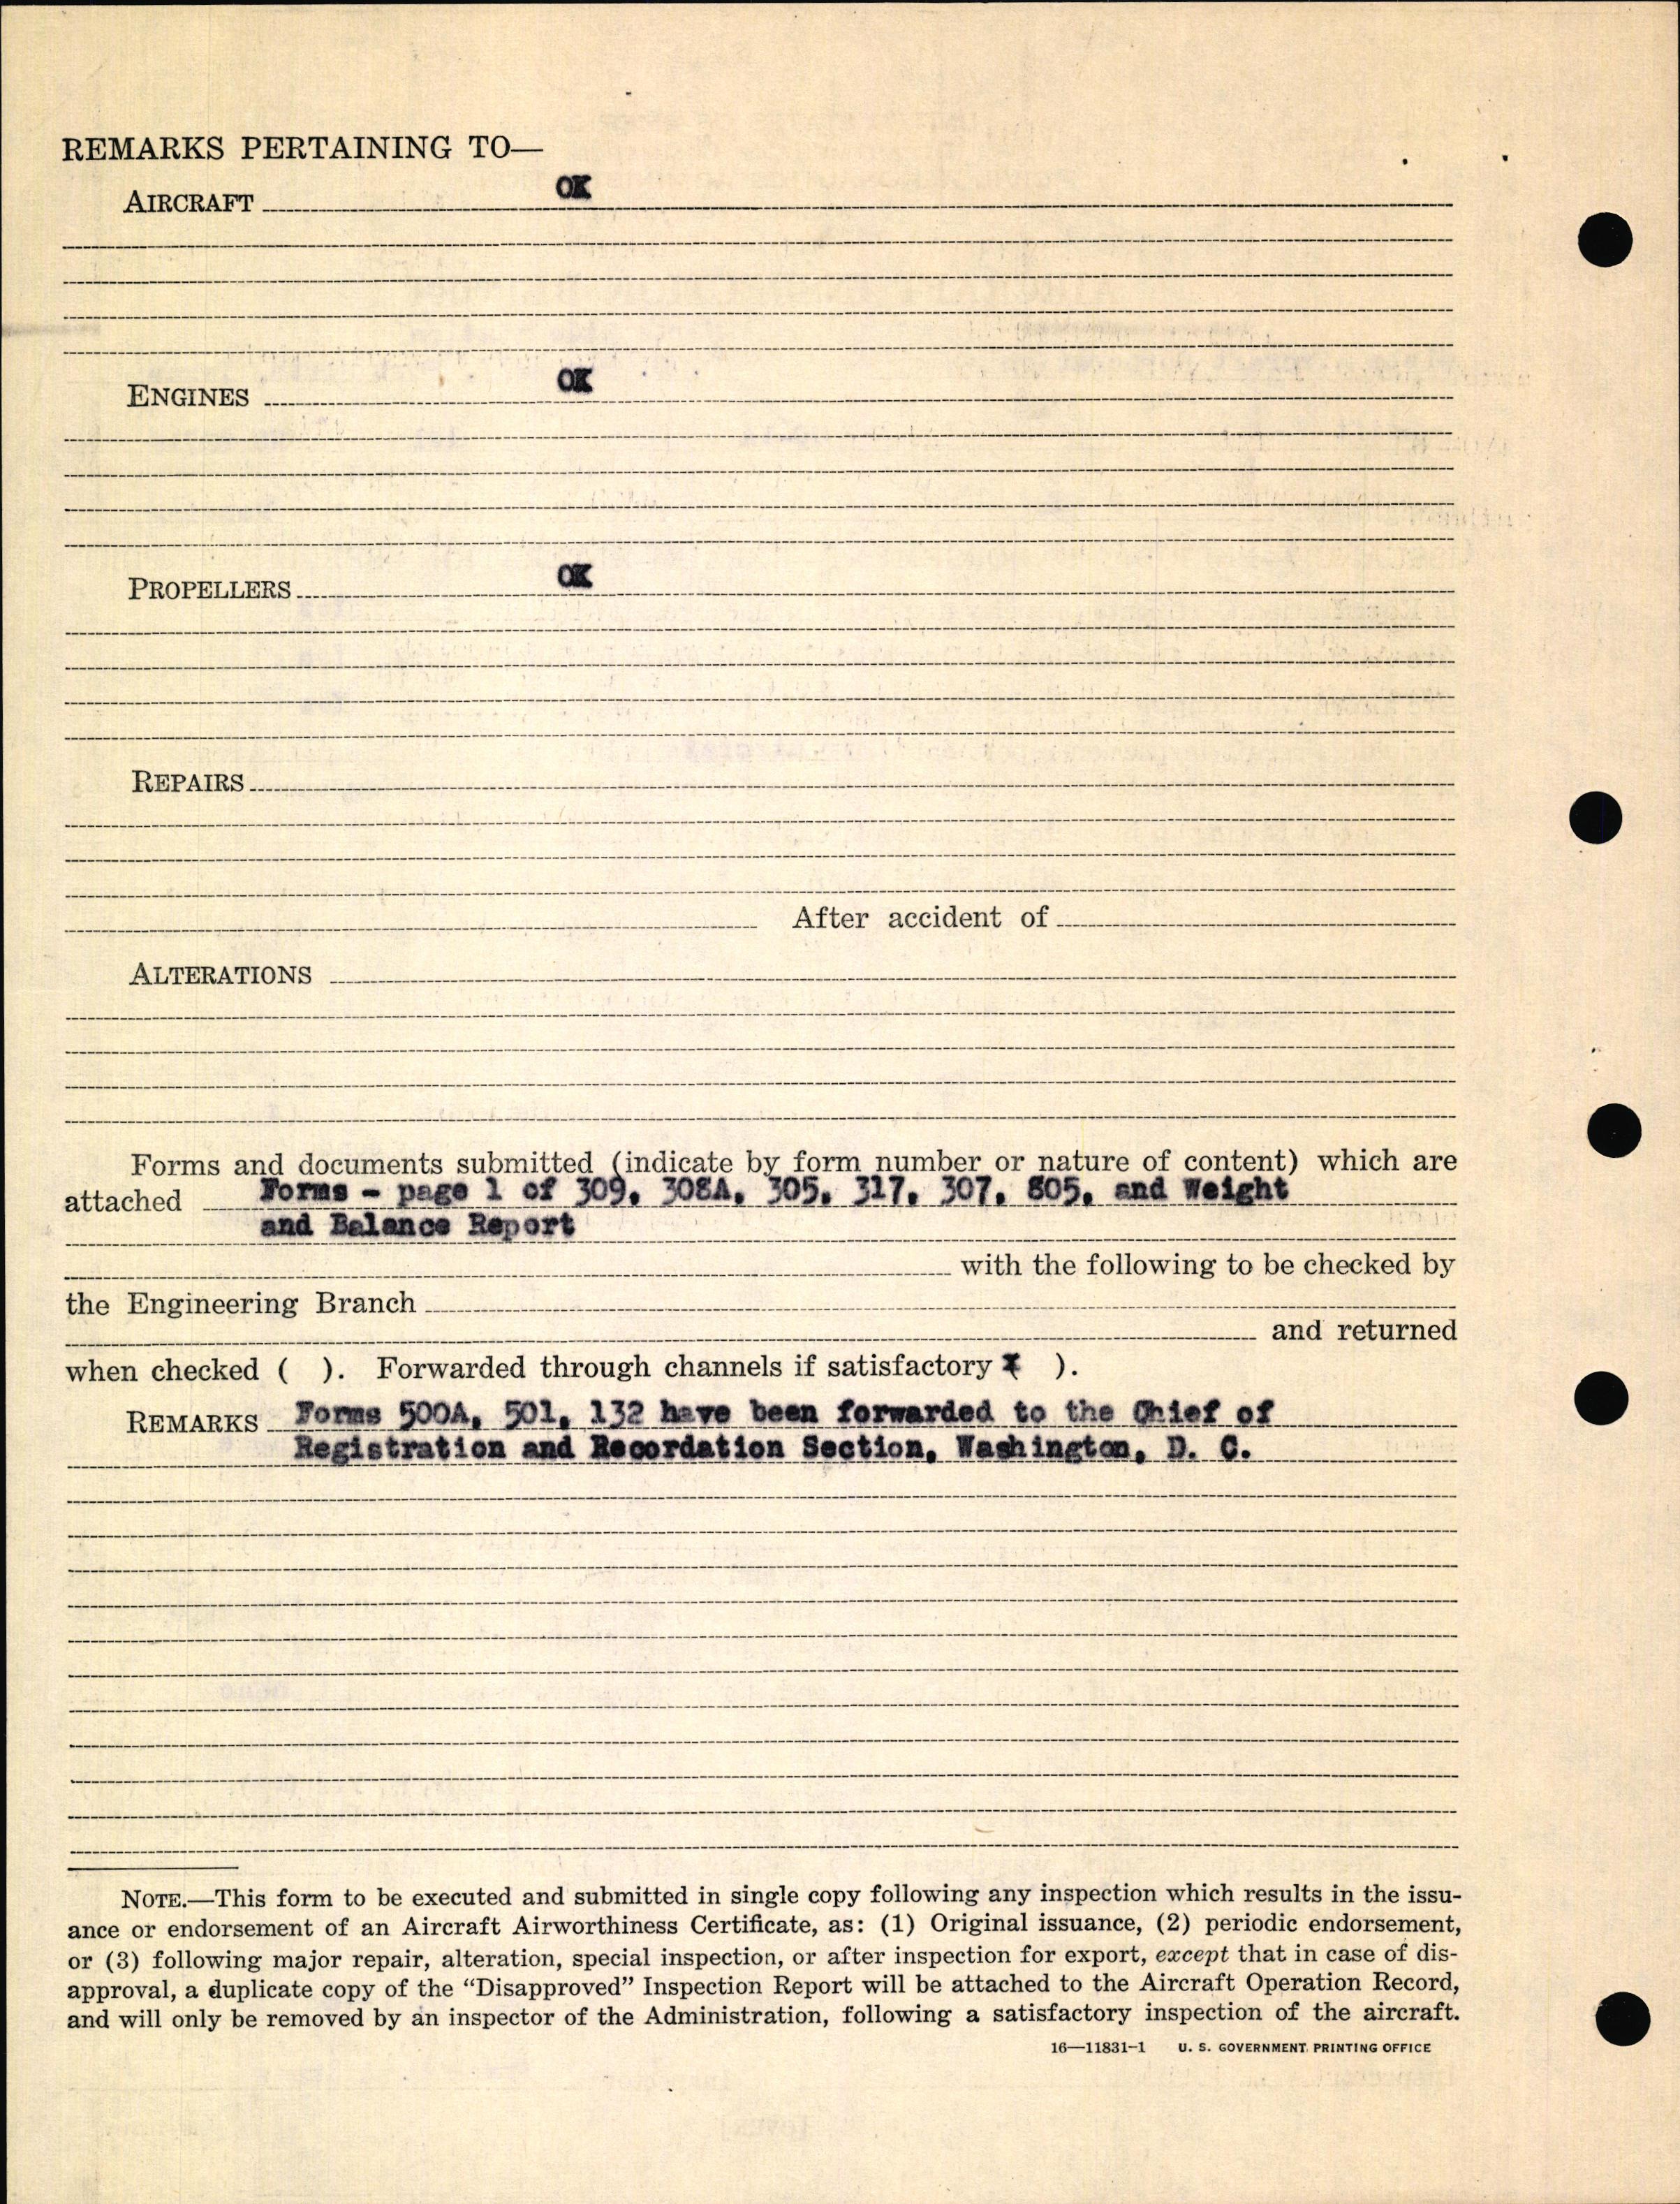 Sample page 6 from AirCorps Library document: Technical Information for Serial Number 121